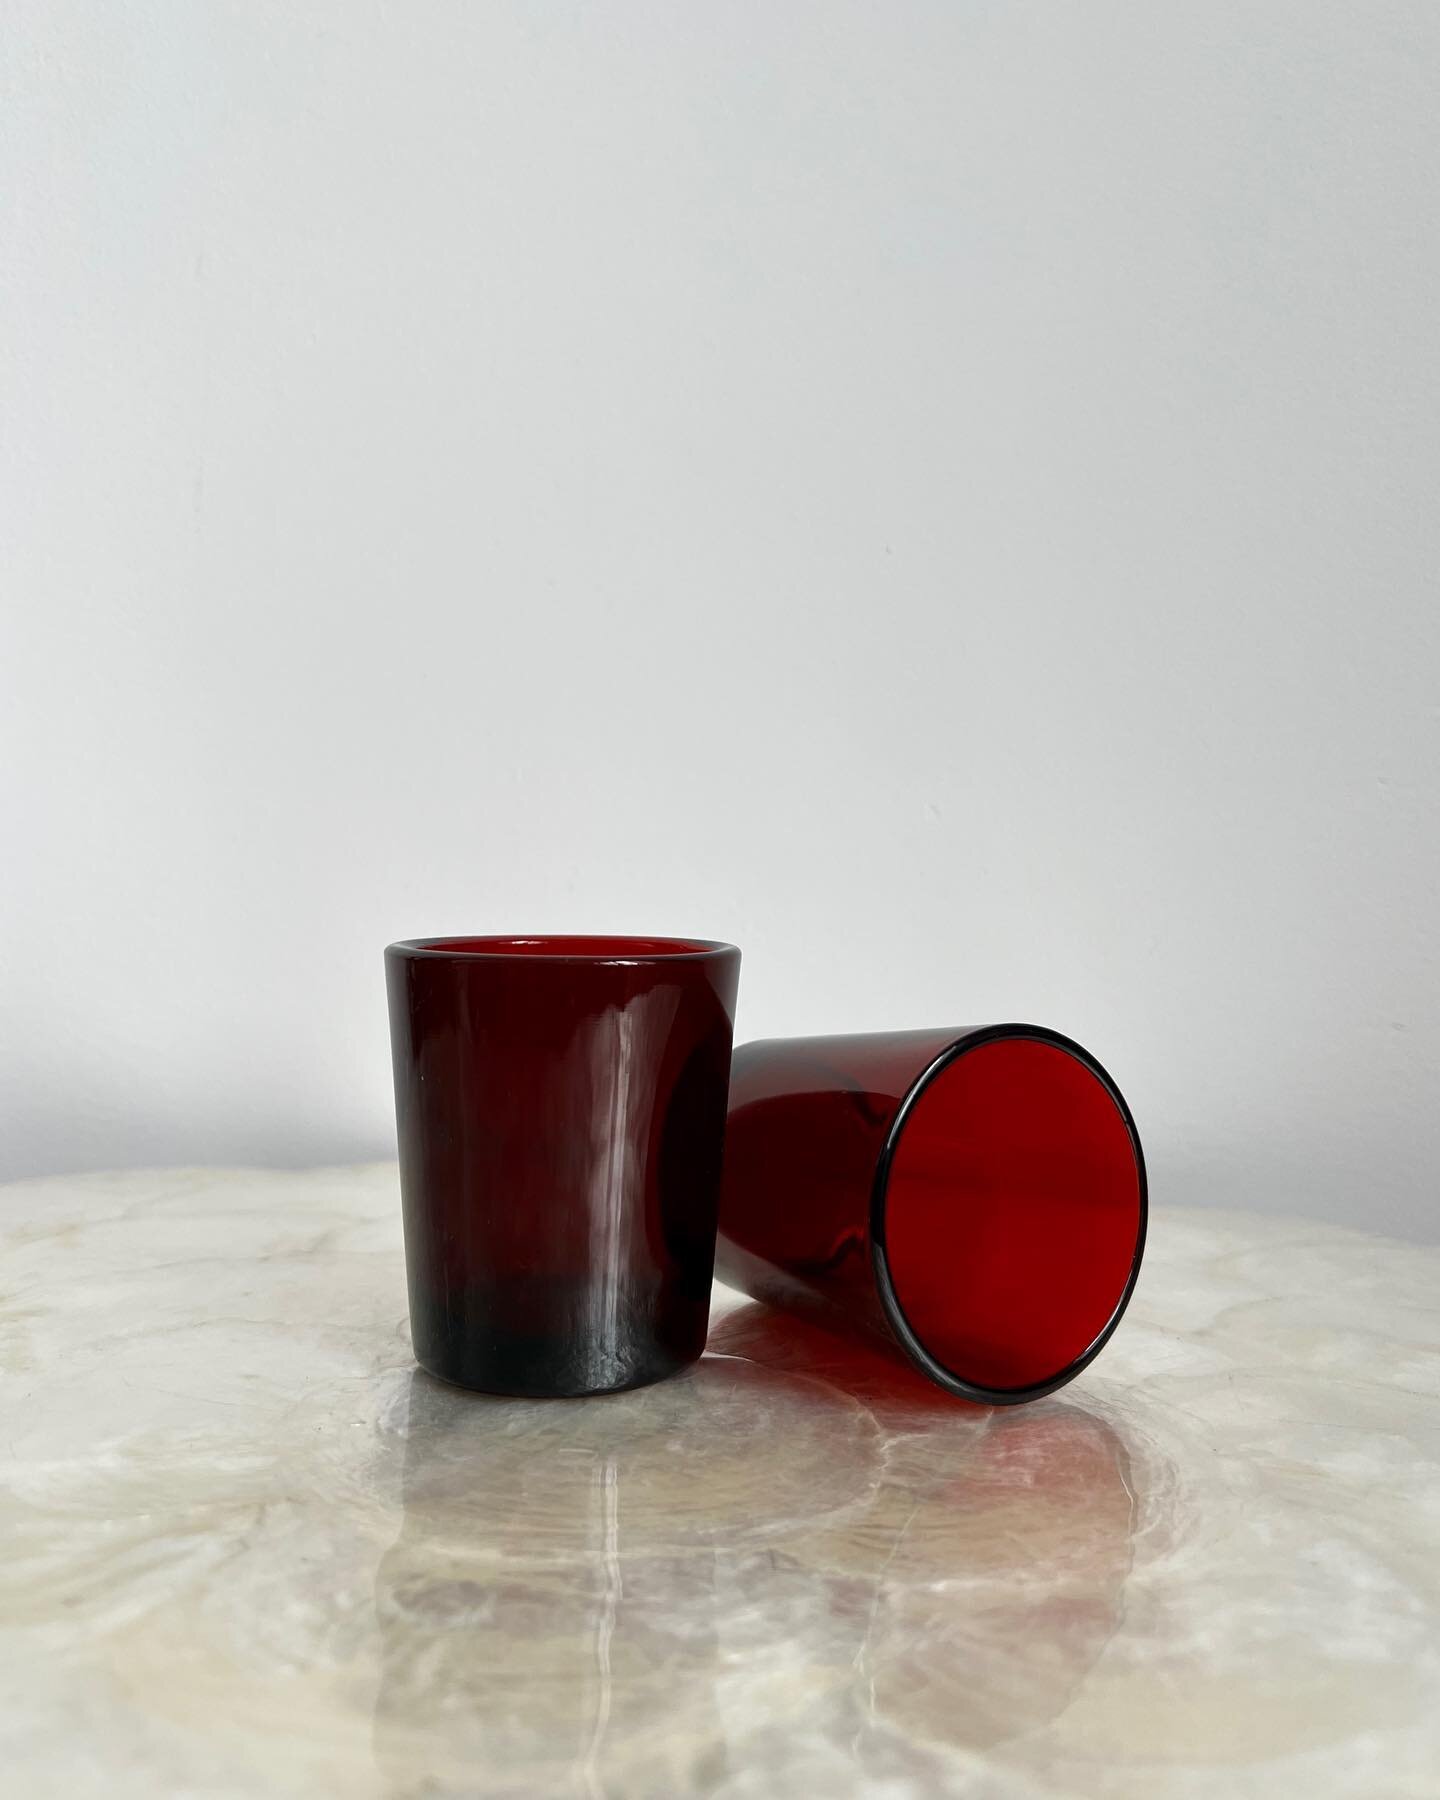 A pair of ruby red juice glasses from the 1980s. These small cups deliver a perfect double-shot

D 2.25&rdquo; / H 2.5&rdquo;
3 oz

&bull; Ruby Red Juice Glasses Set &bull; $22

For more details and care instructions, shop on our website (www.piquant